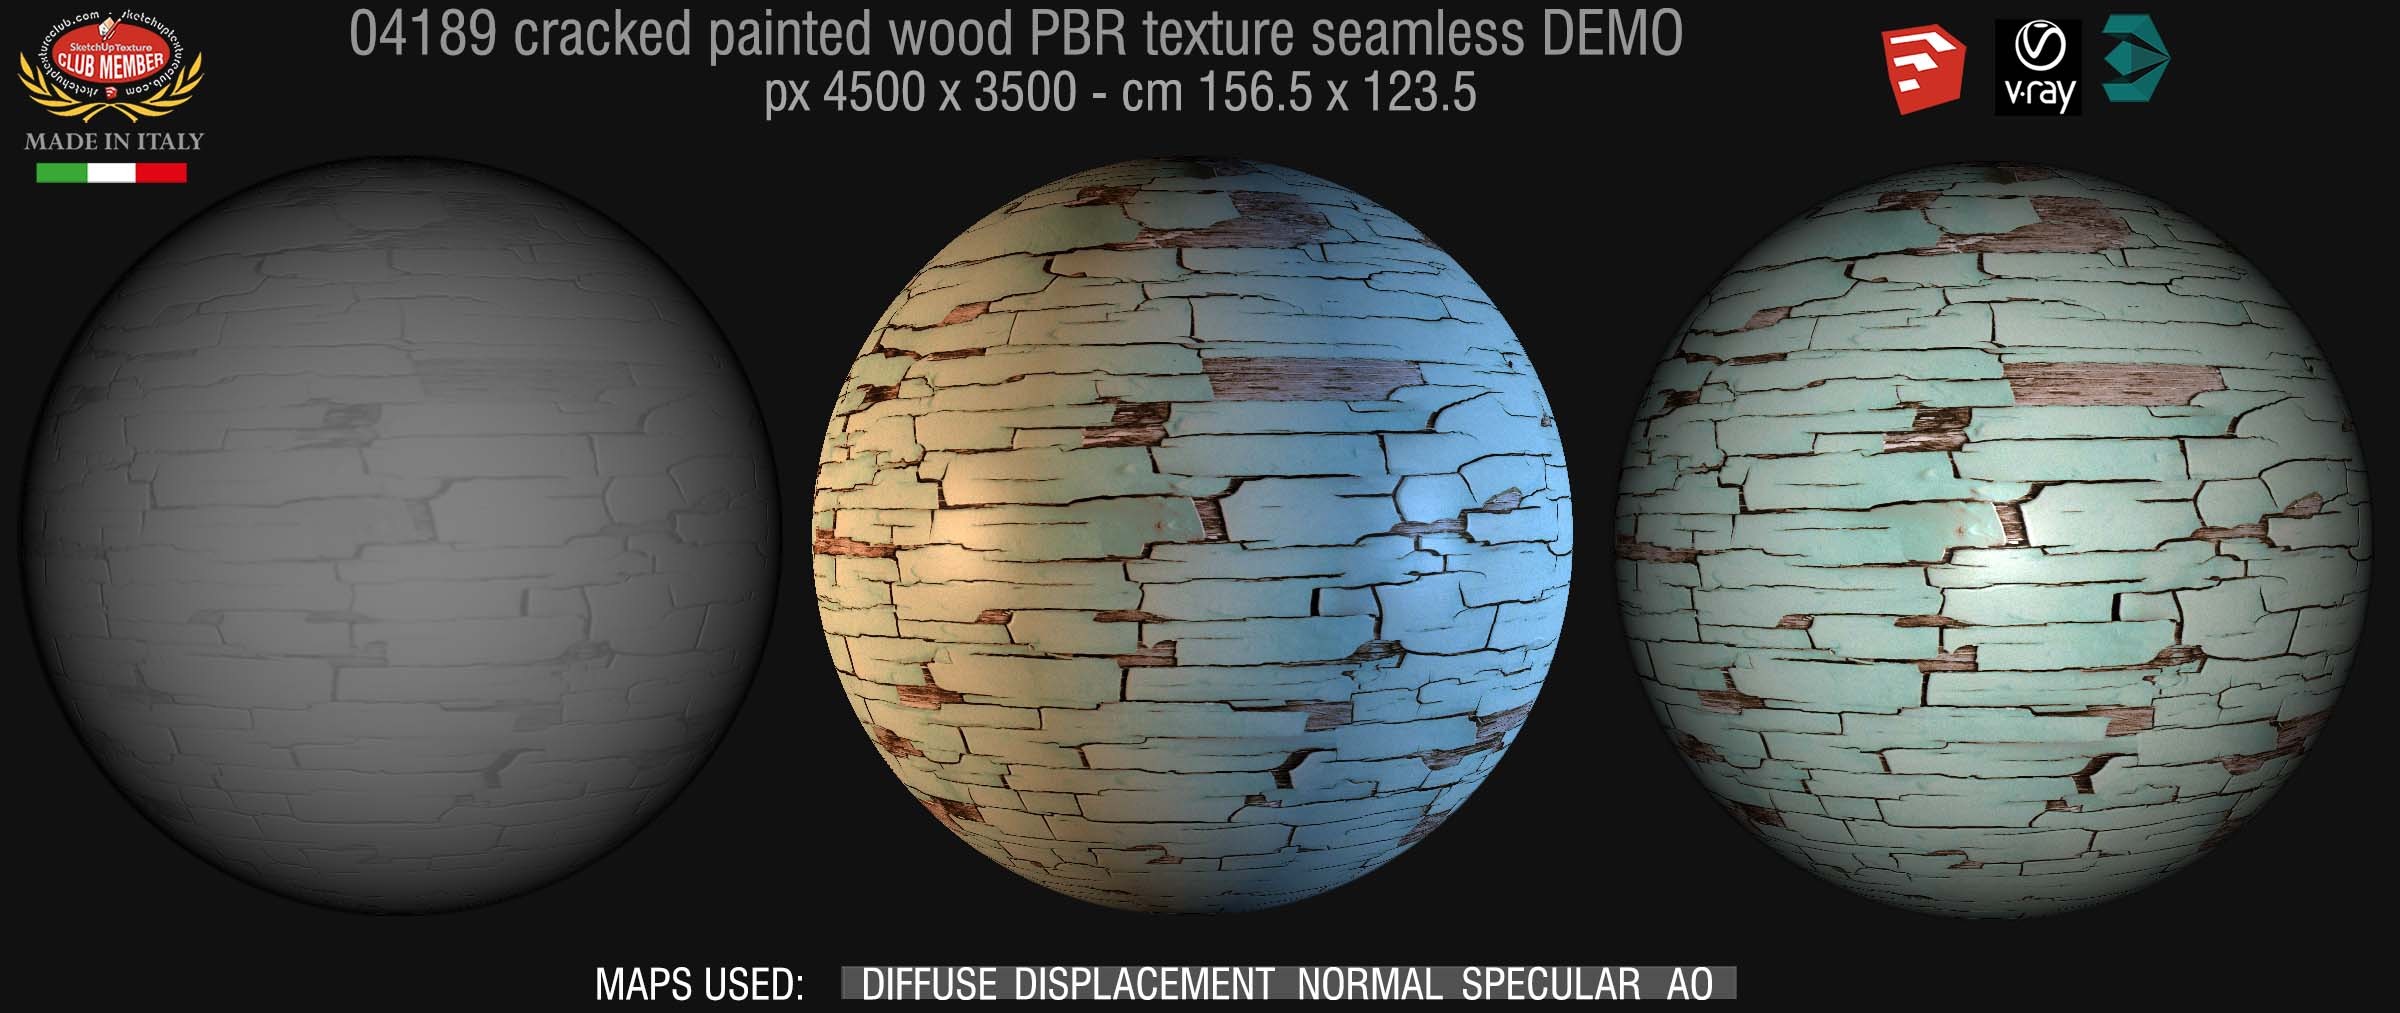 04189 cracked painted wood PBR texture seamless DEMO